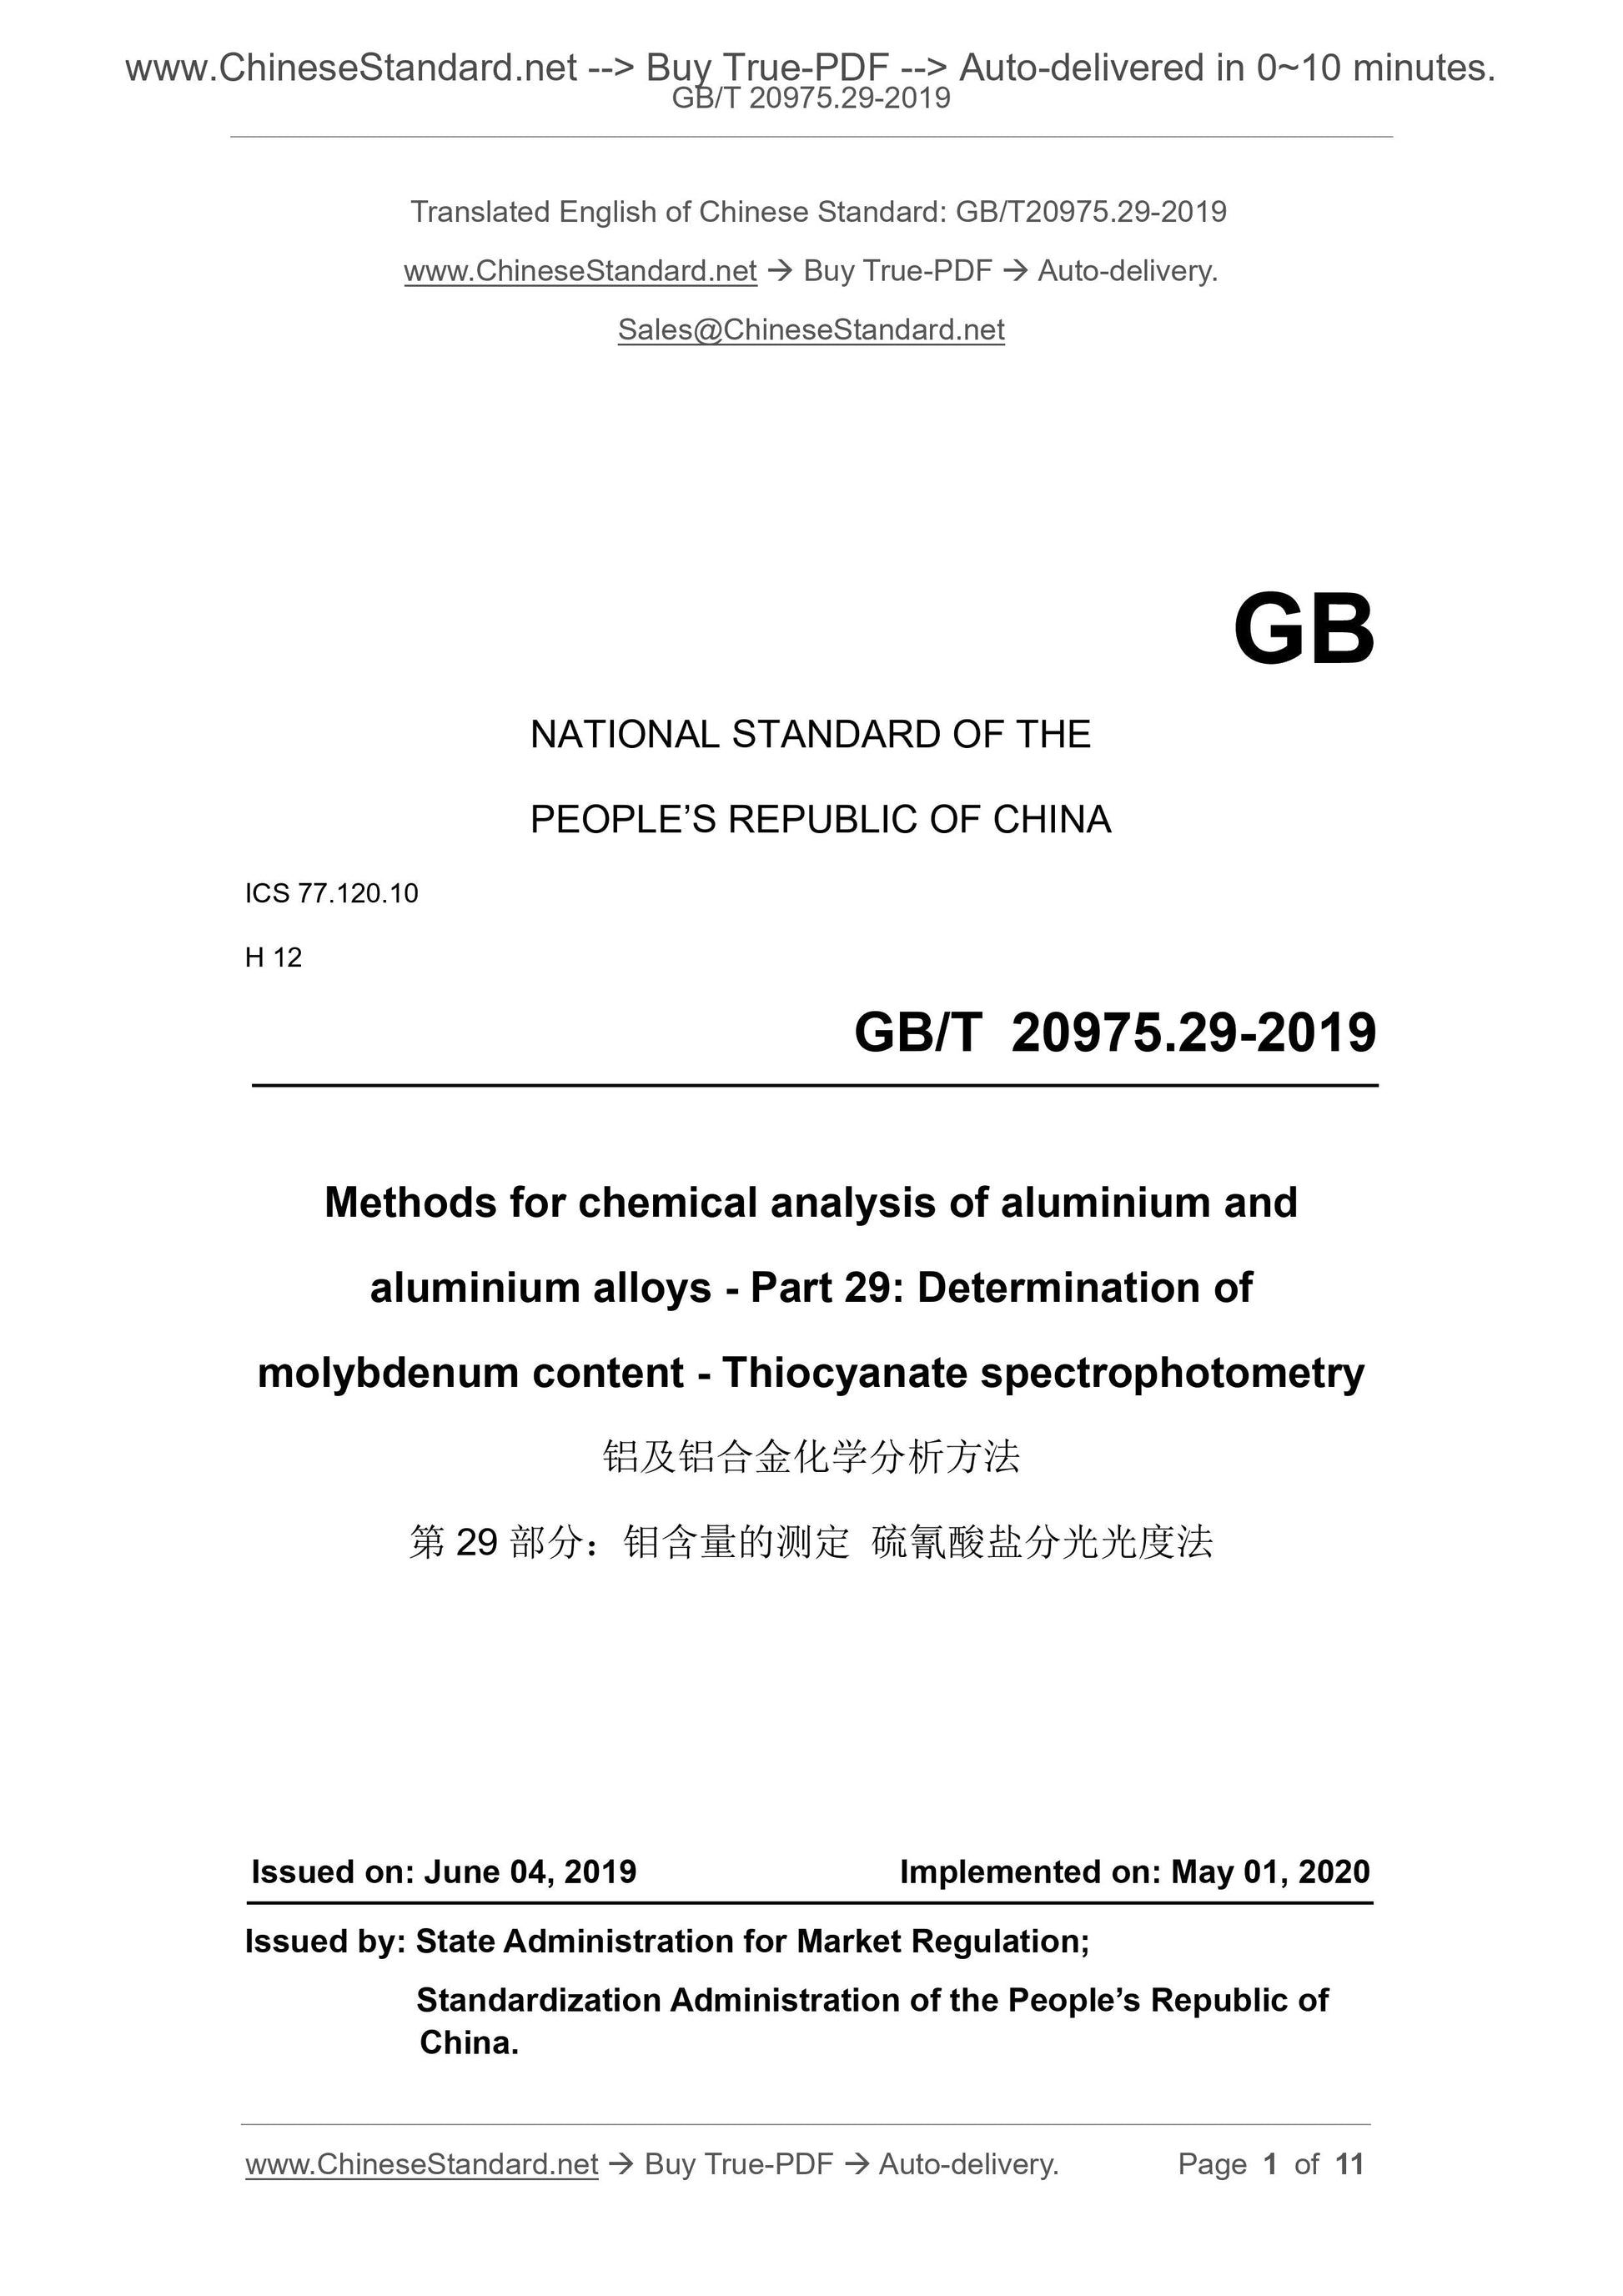 GB/T 20975.29-2019 Page 1